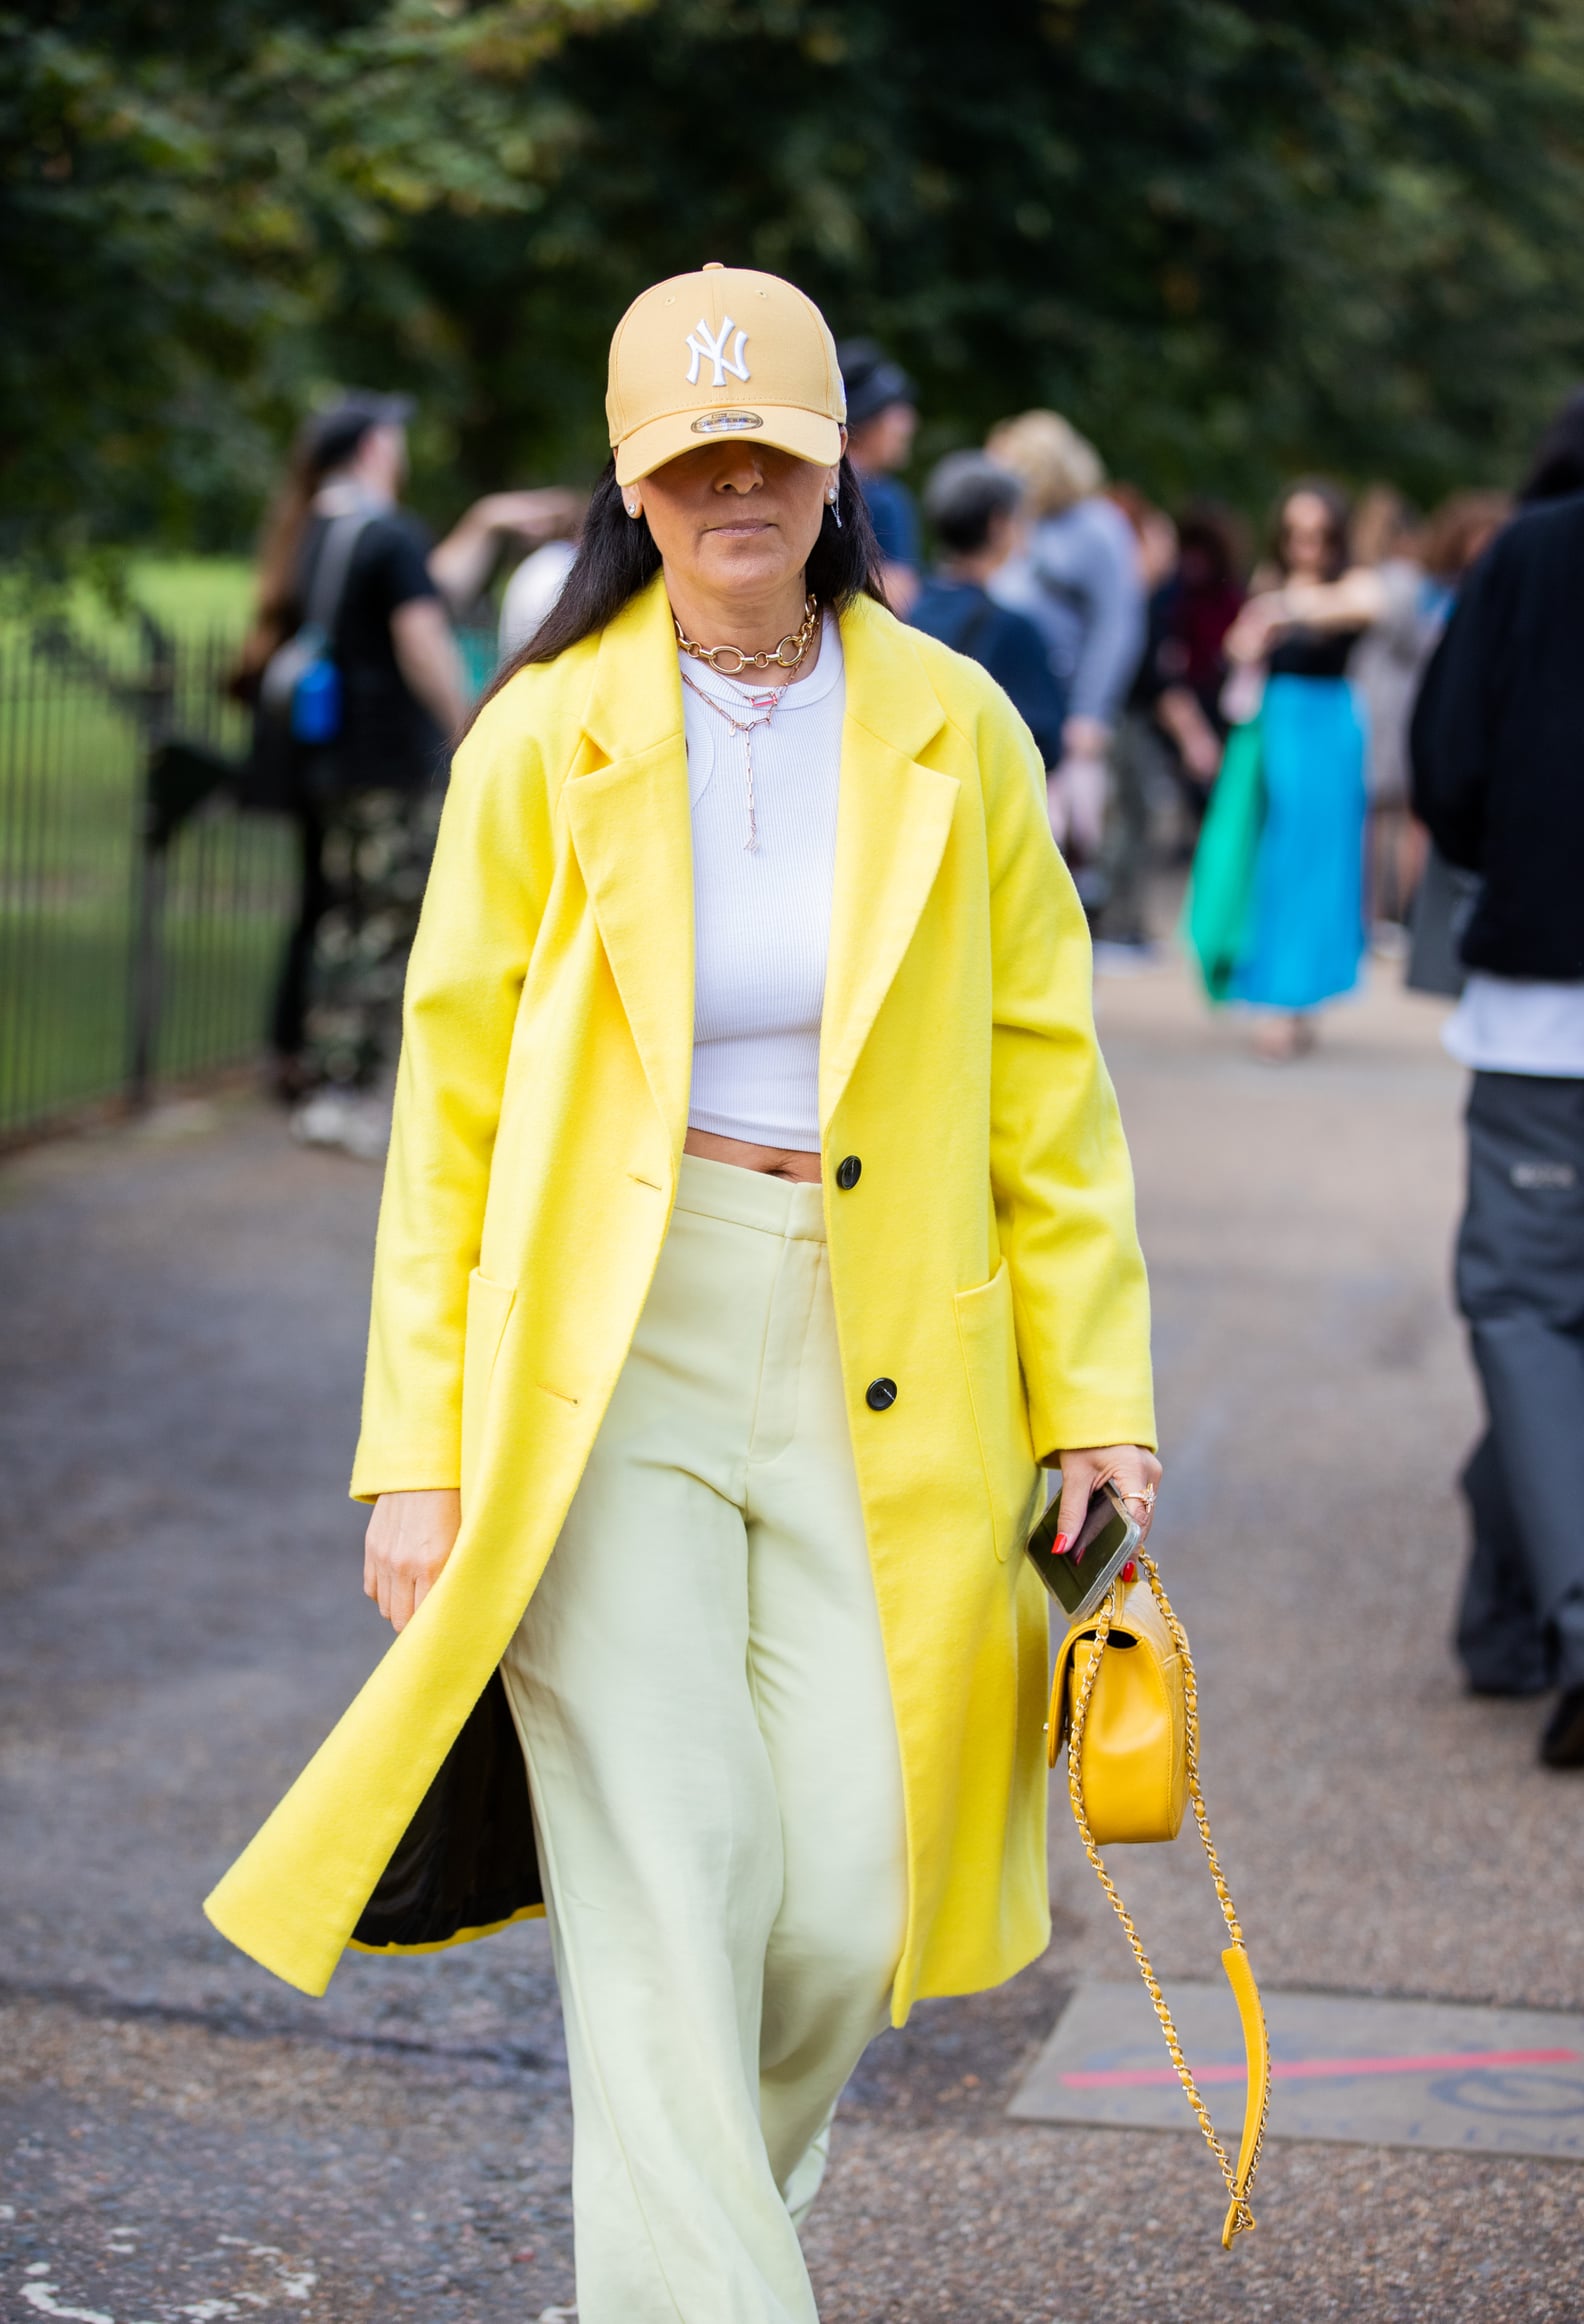 Street Style Is Full of Bright Colors at London Fashion Week | POPSUGAR ...